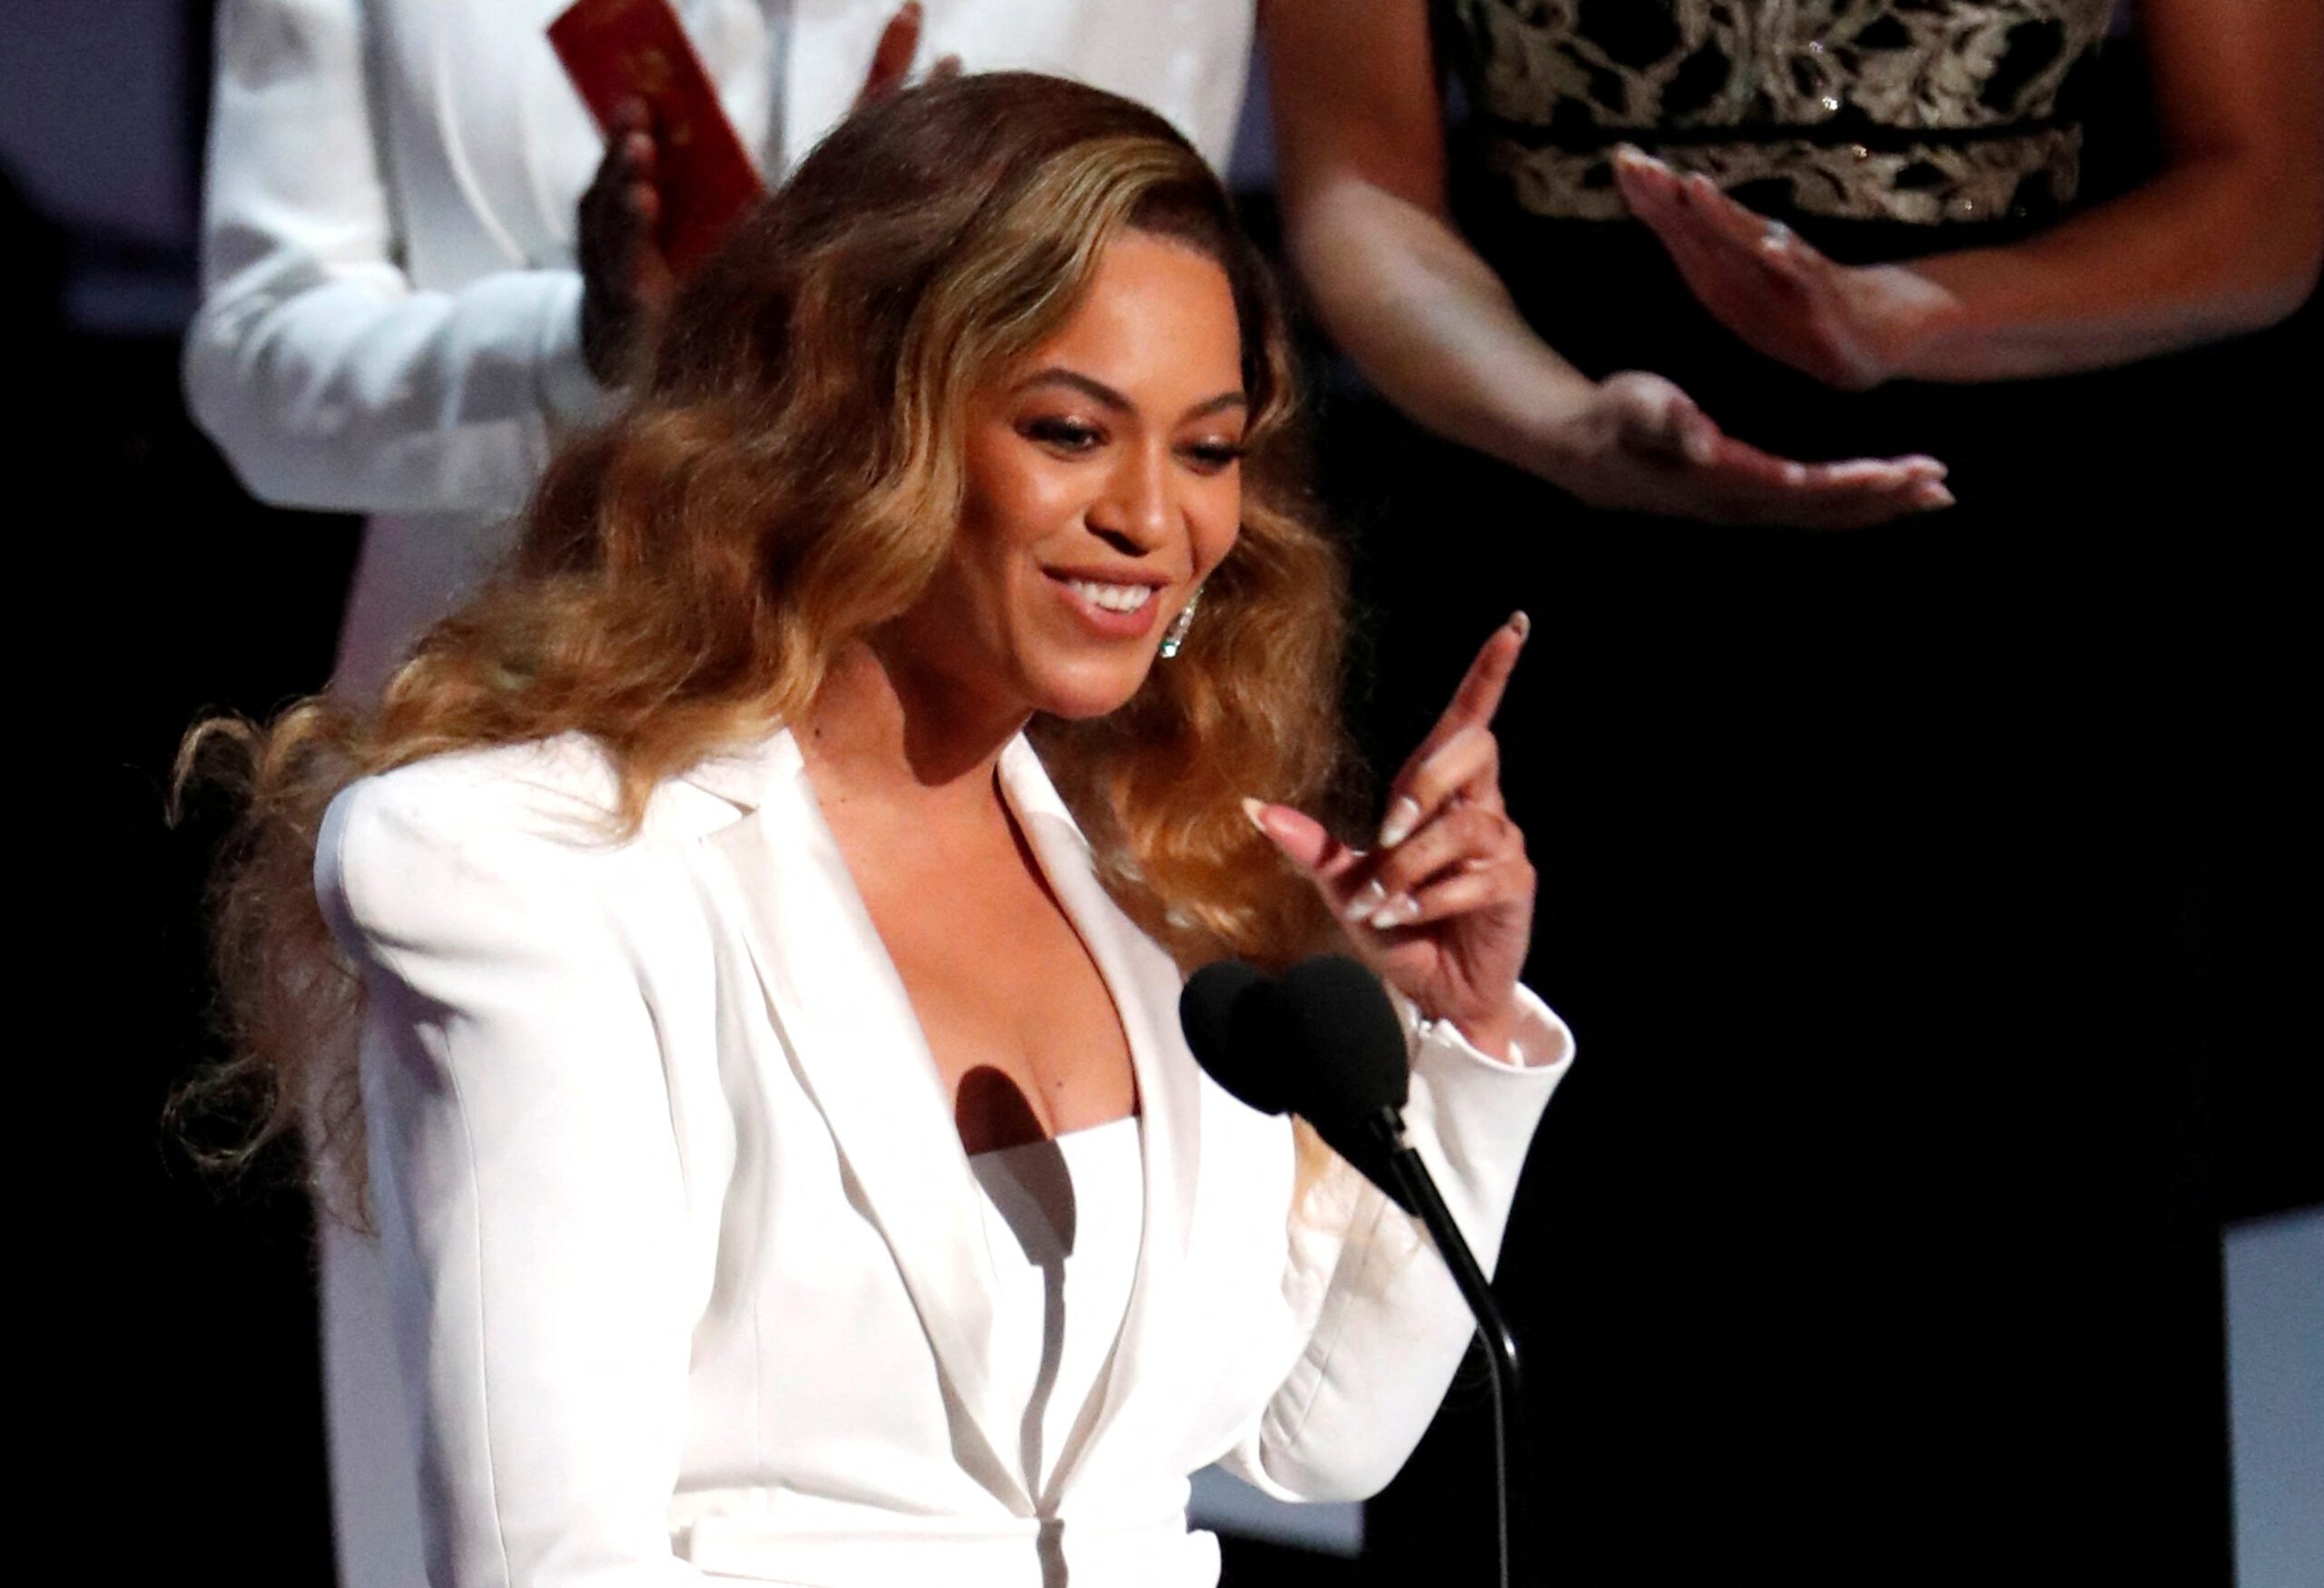 Beyonce secures first UK Number 1 spot in 14 years with ‘Texas Hold ‘Em’